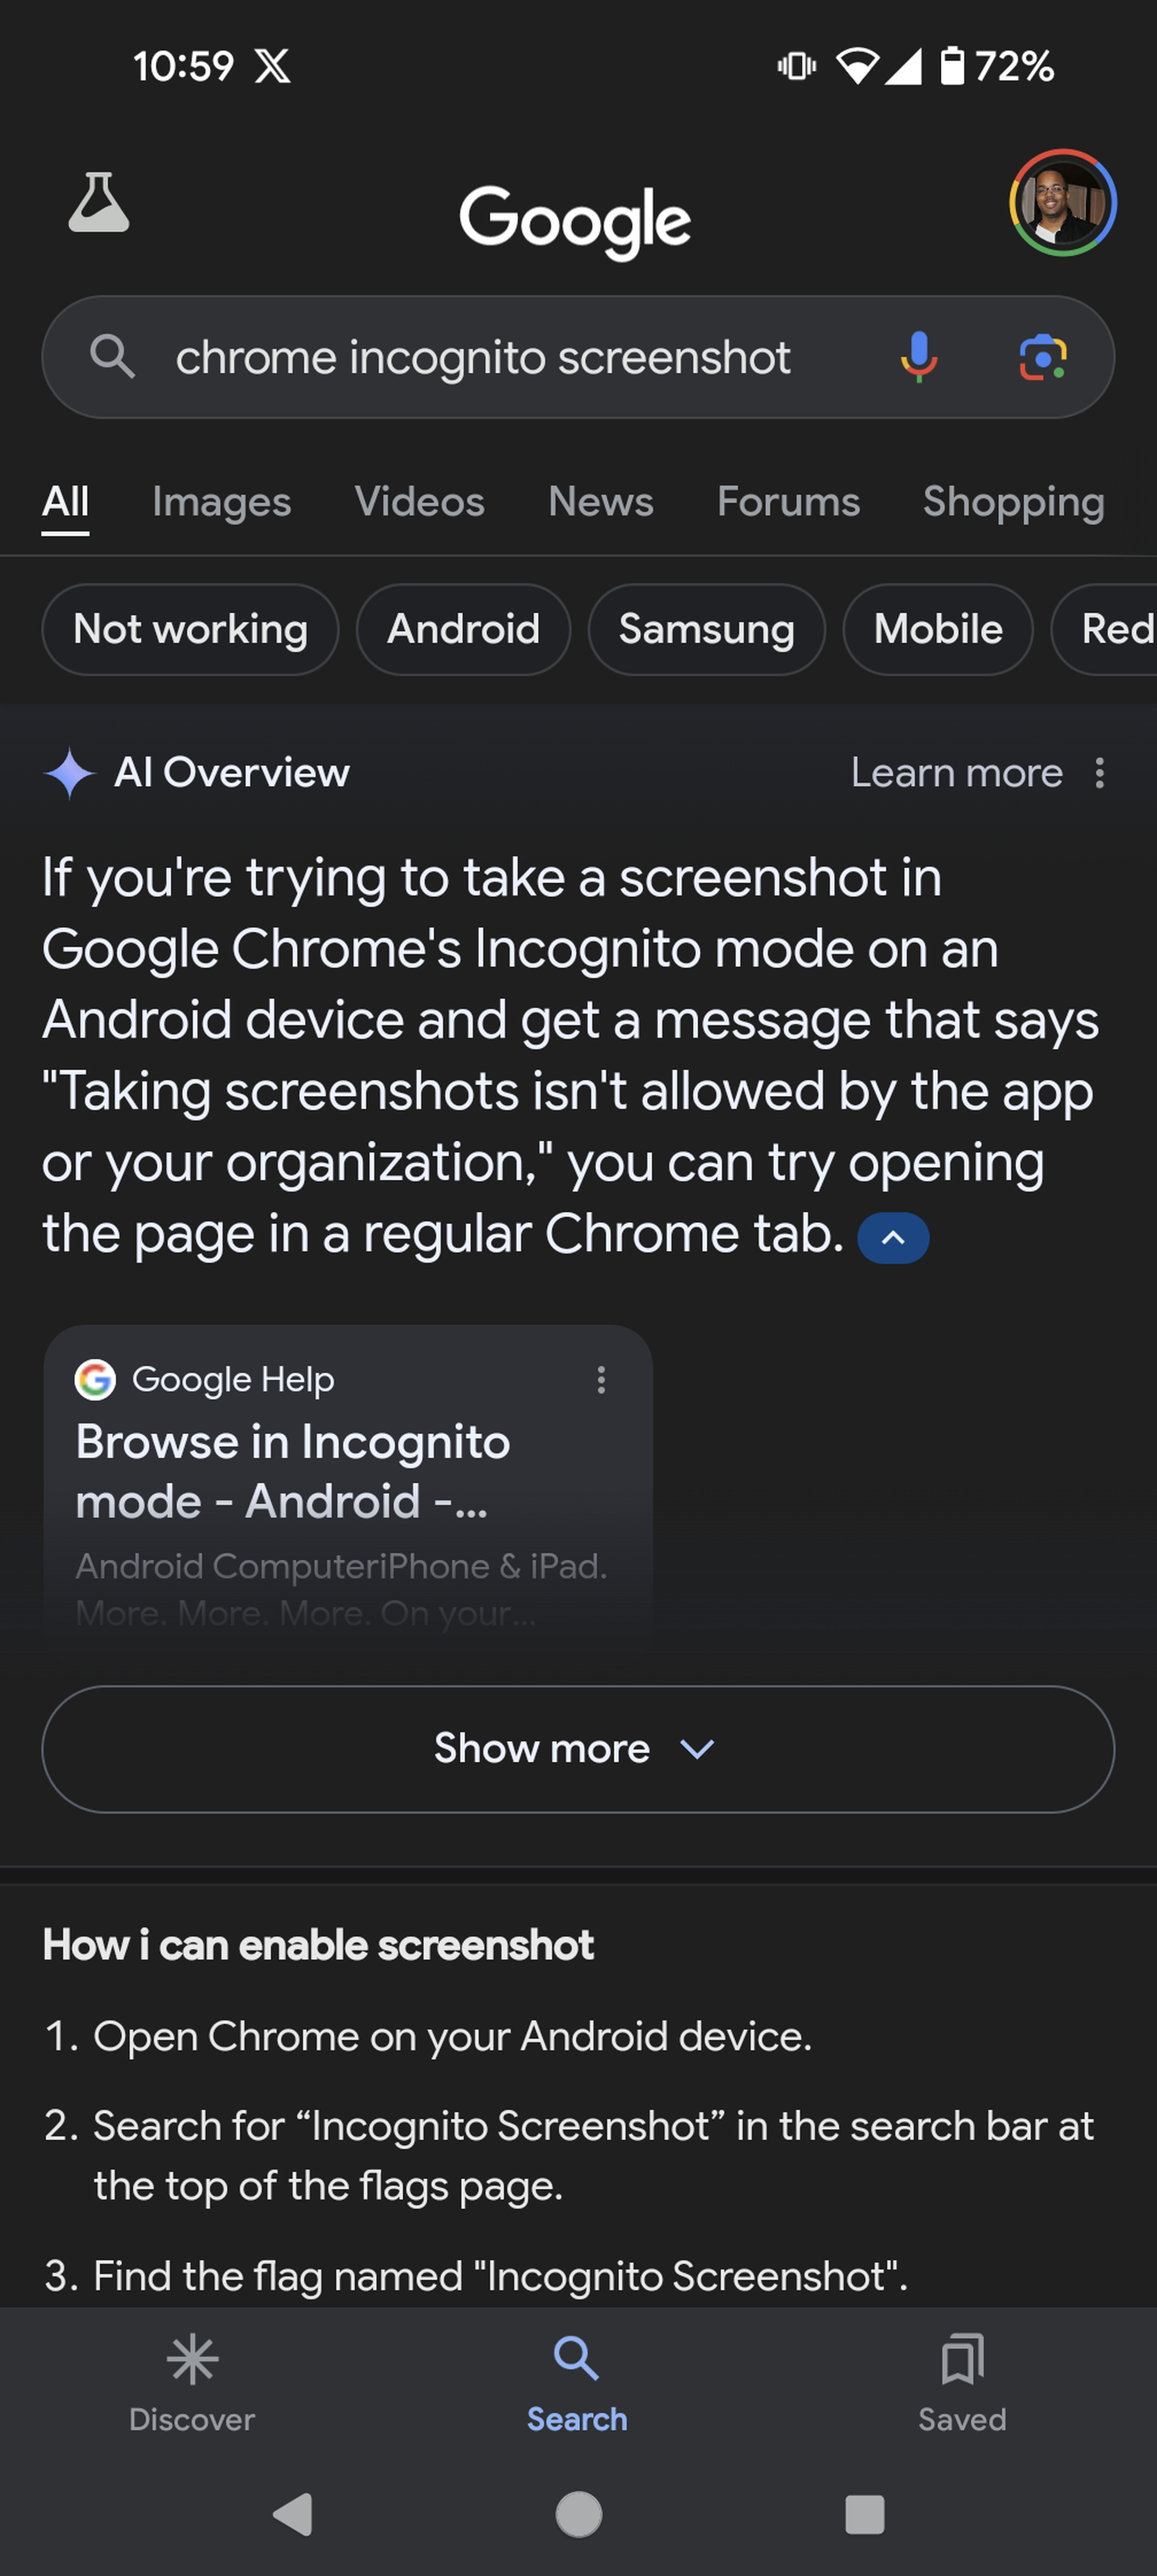 Al Overview: If you’re trying to take a screenshot in Google Chrome’s Incognito mode on an Android device and get a message that says”Taking screenshots isn’t allowed by the app or your organization,” you can try opening the page in a regular Chrome tab.